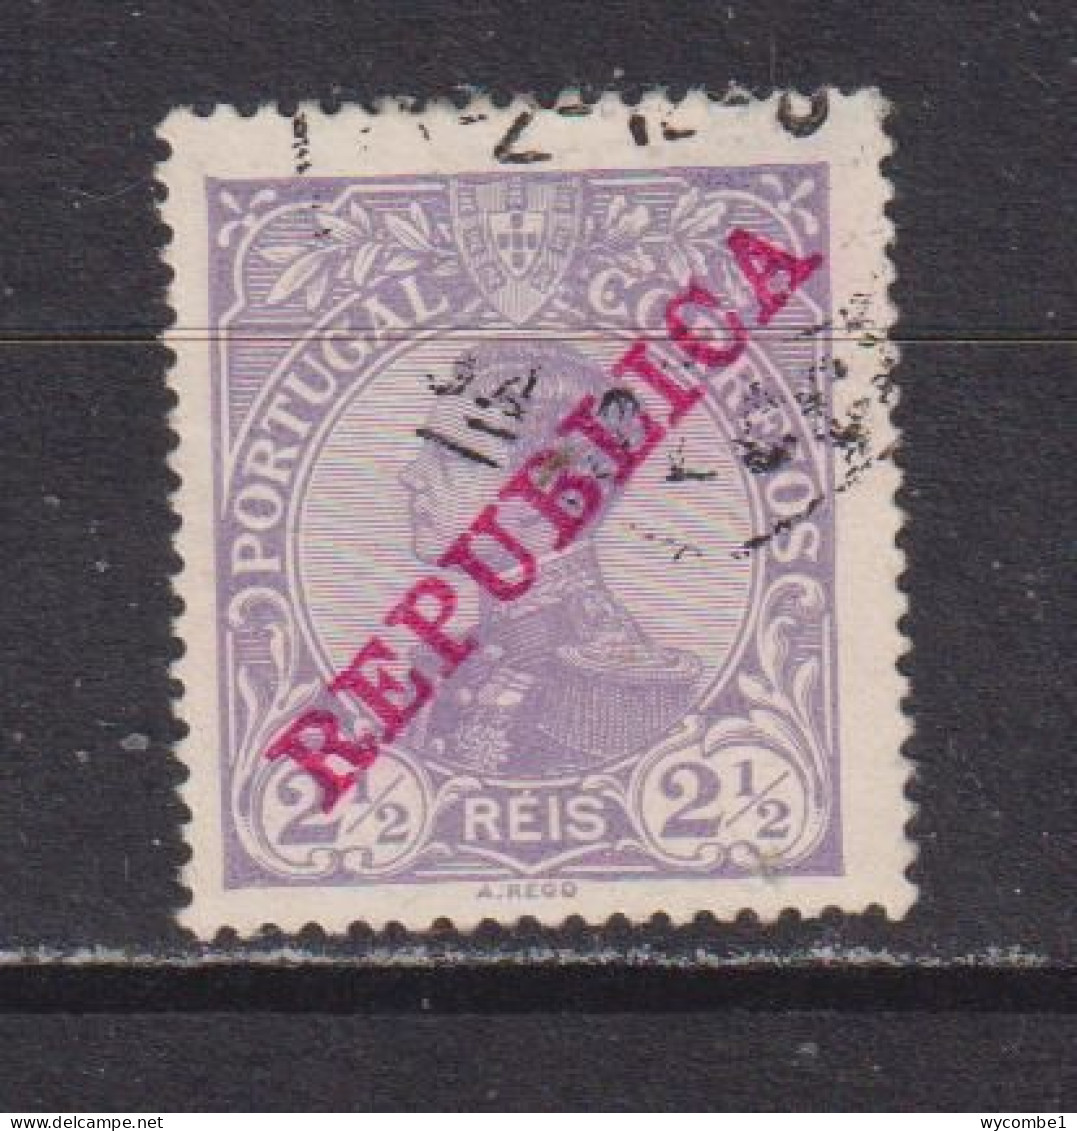 PORTUGAL - 1910 Republica  21/2r  Used As Scan - Used Stamps